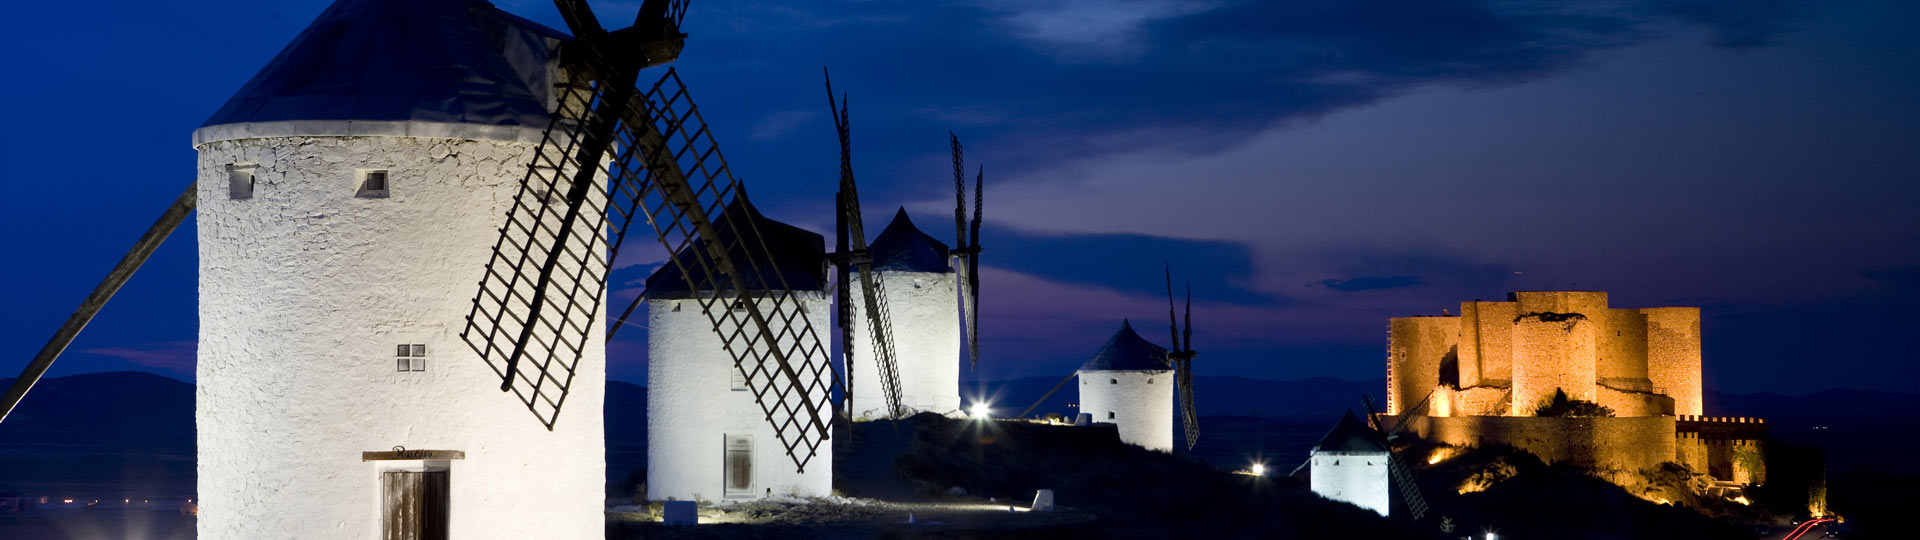 Windmills with the castle of Consuegra in the background